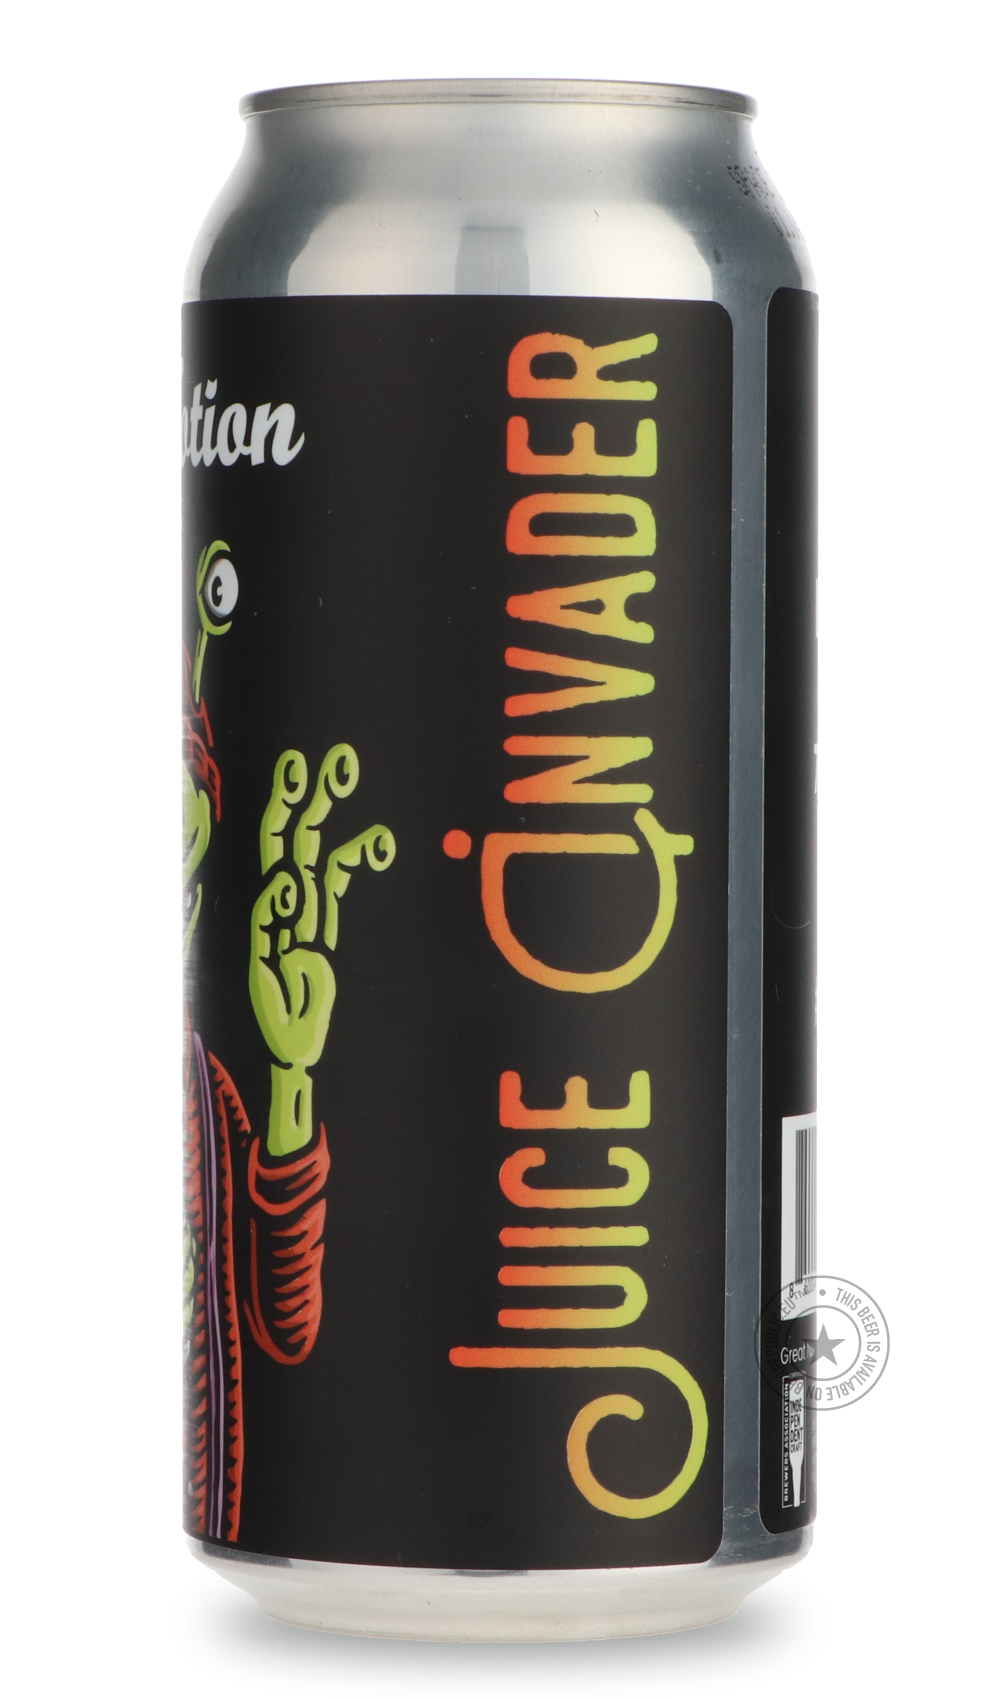 -Great Notion- Juice Invader-IPA- Only @ Beer Republic - The best online beer store for American & Canadian craft beer - Buy beer online from the USA and Canada - Bier online kopen - Amerikaans bier kopen - Craft beer store - Craft beer kopen - Amerikanisch bier kaufen - Bier online kaufen - Acheter biere online - IPA - Stout - Porter - New England IPA - Hazy IPA - Imperial Stout - Barrel Aged - Barrel Aged Imperial Stout - Brown - Dark beer - Blond - Blonde - Pilsner - Lager - Wheat - Weizen - Amber - Barl